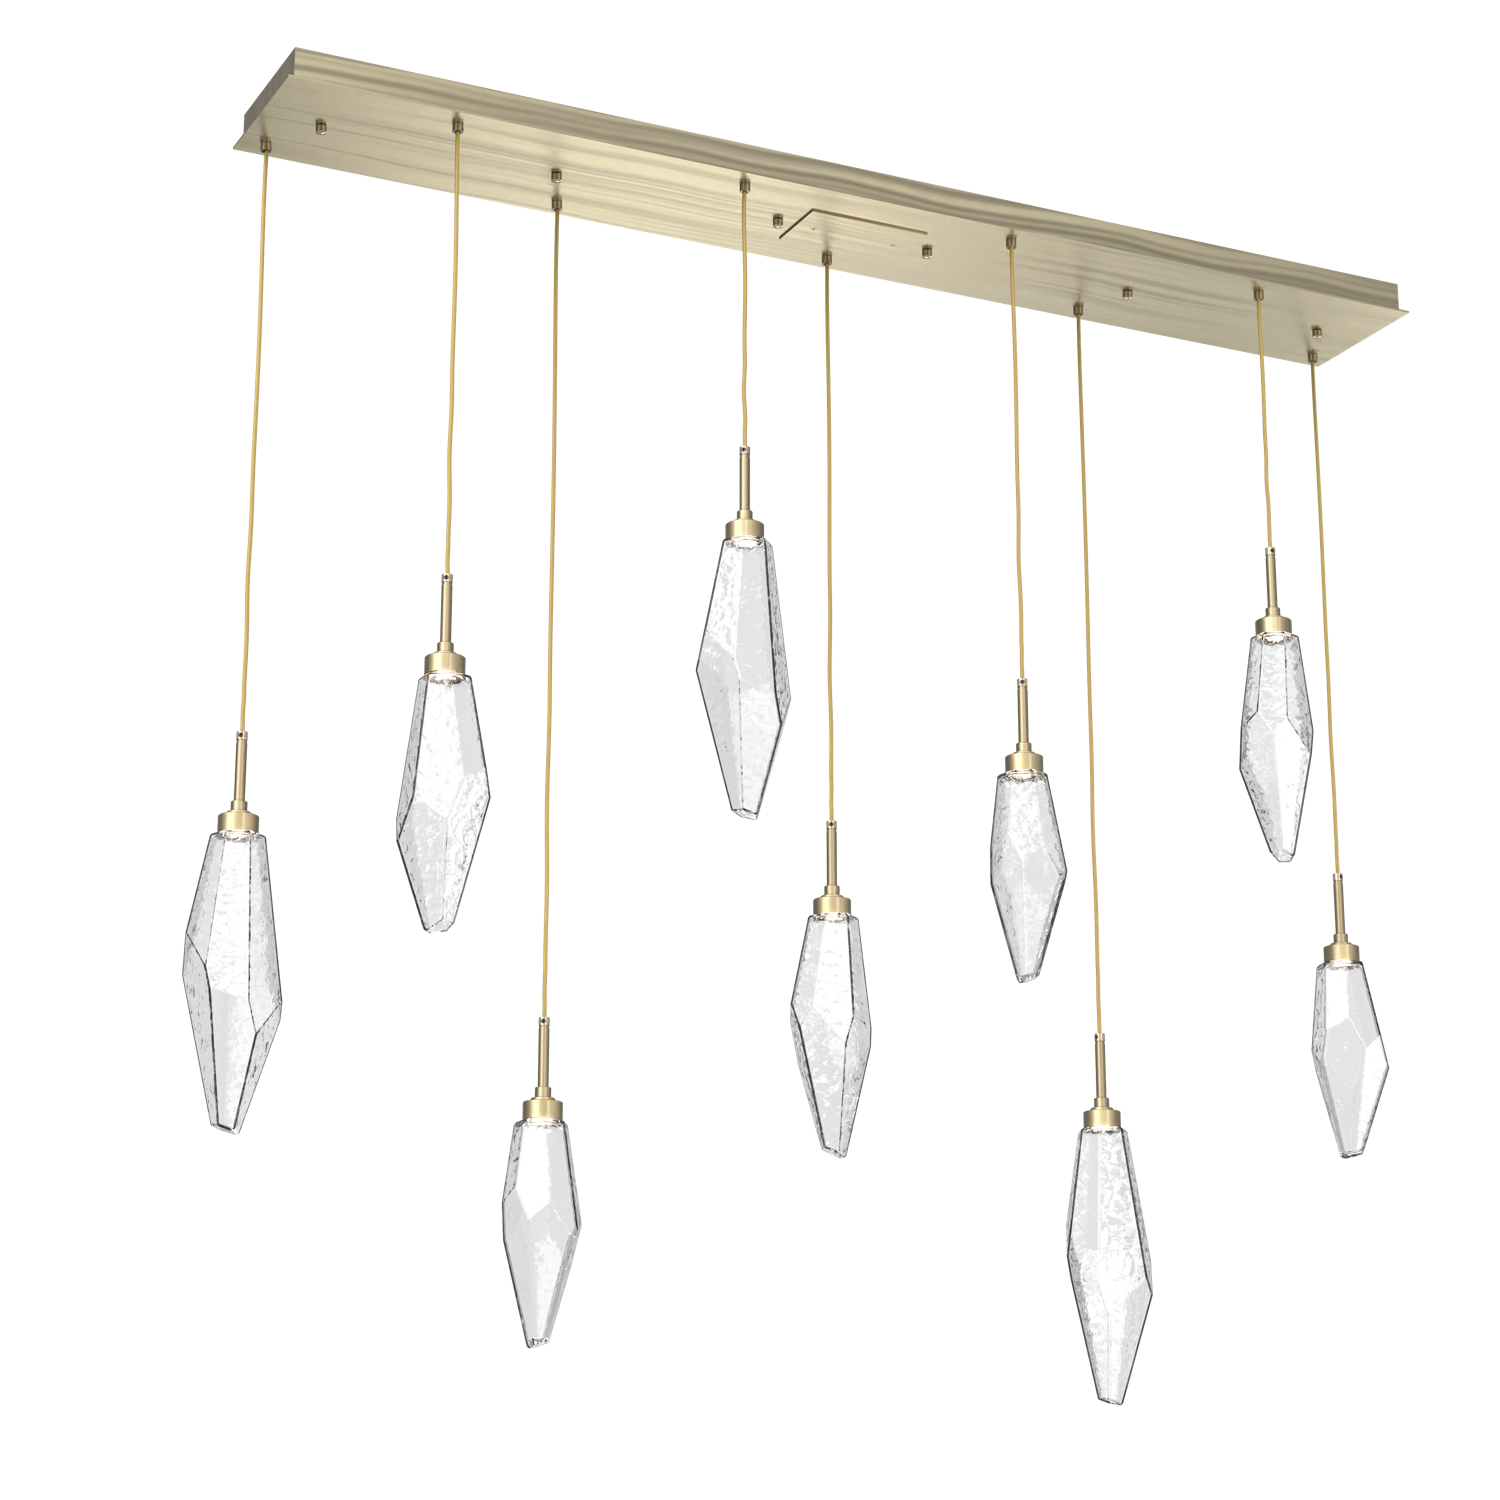 PLB0050-09-HB-CC-Hammerton-Studio-Rock-Crystal-9-light-linear-pendant-chandelier-with-heritage-brass-finish-and-clear-glass-shades-and-LED-lamping